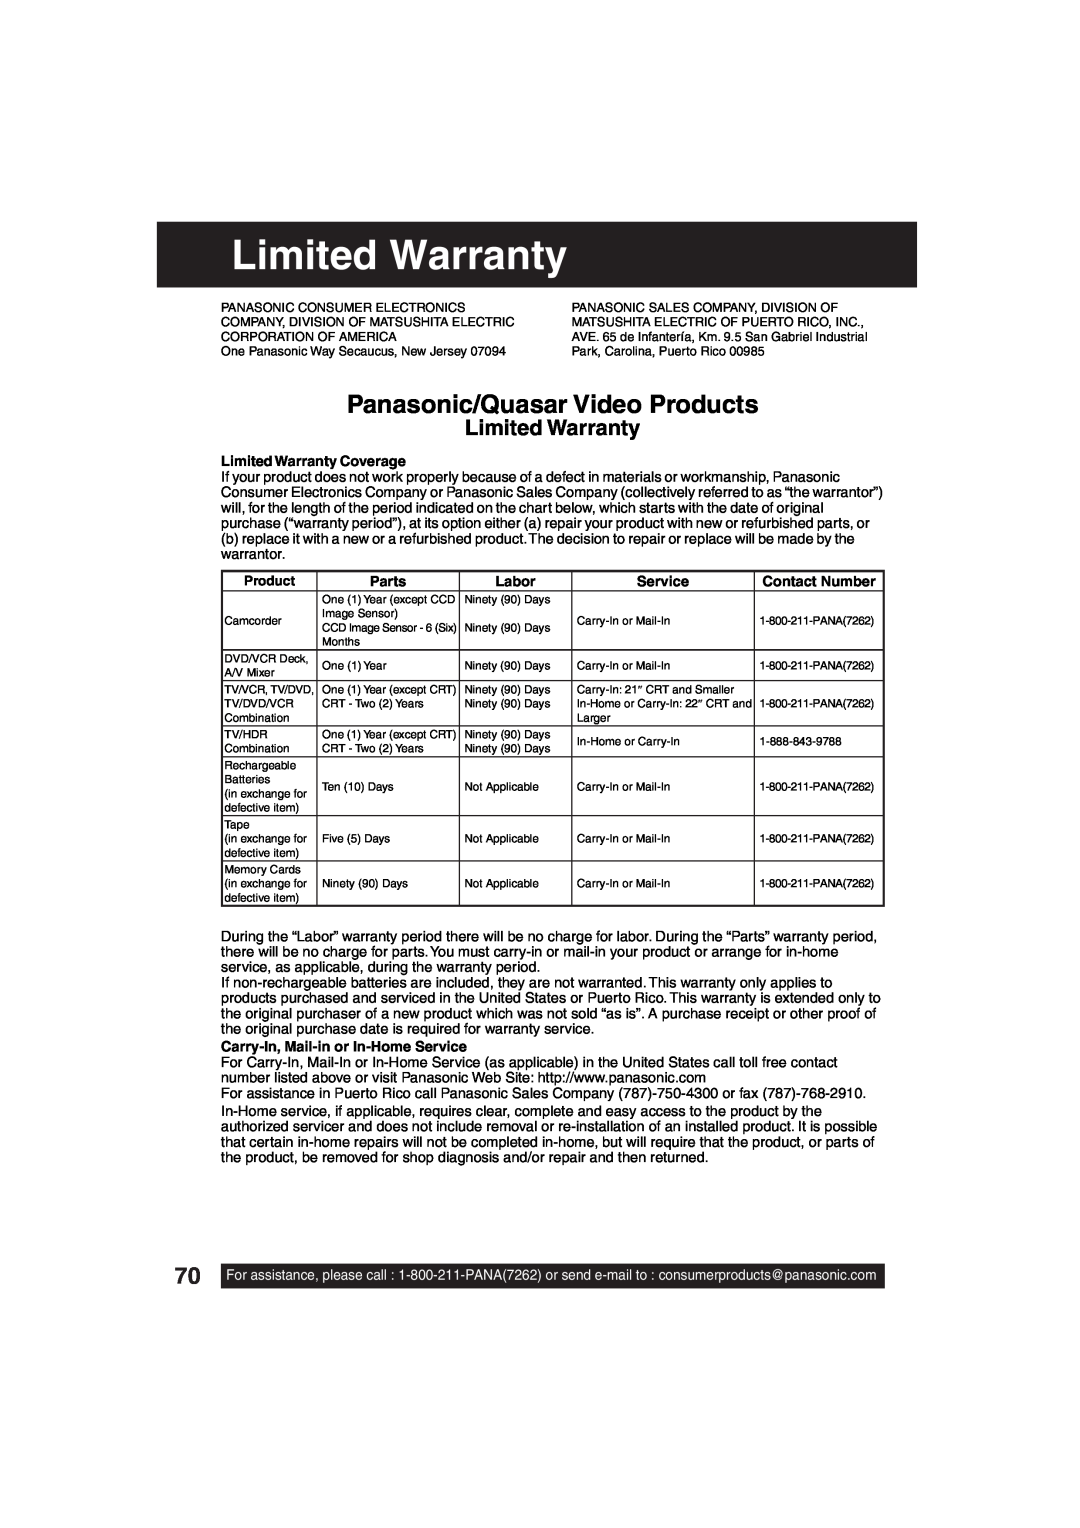 Panasonic PV-DF203 Panasonic/Quasar Video Products, Limited Warranty Coverage, Parts, Labor, Service, Contact Number 